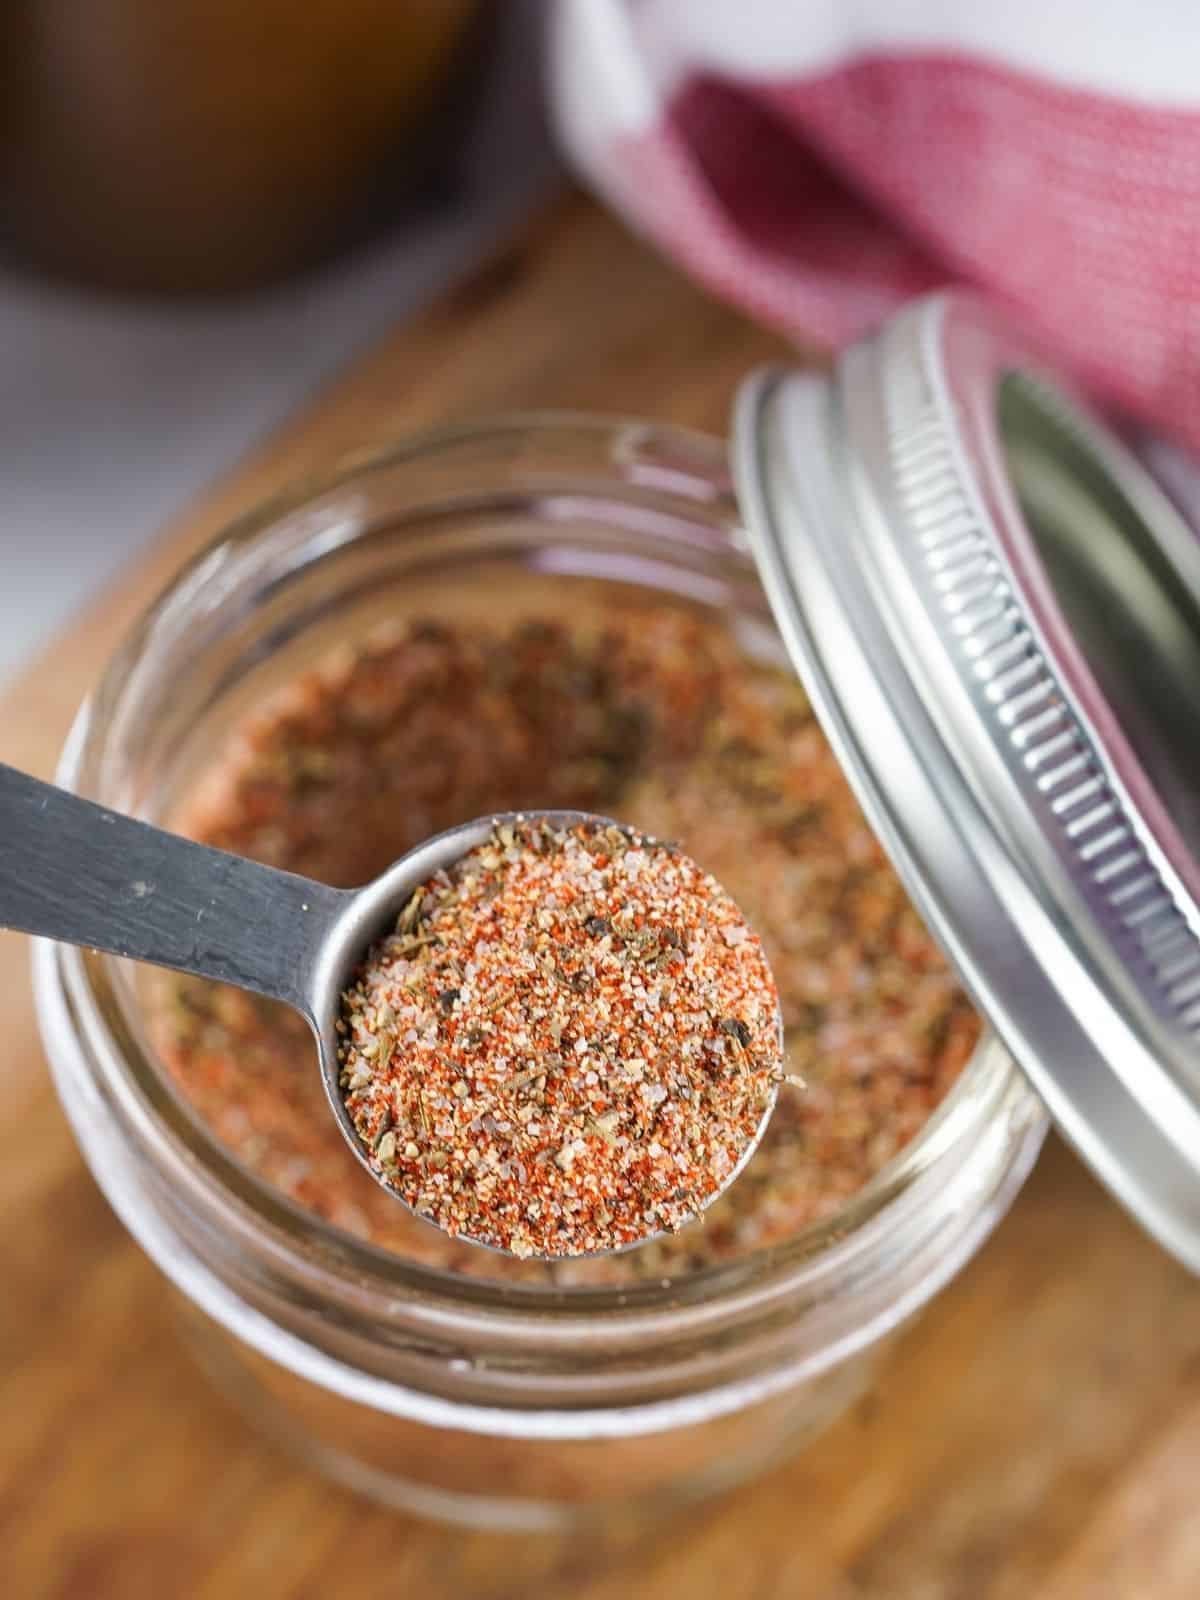 Tablespoon filled with steak seaoning mix and mason jar.